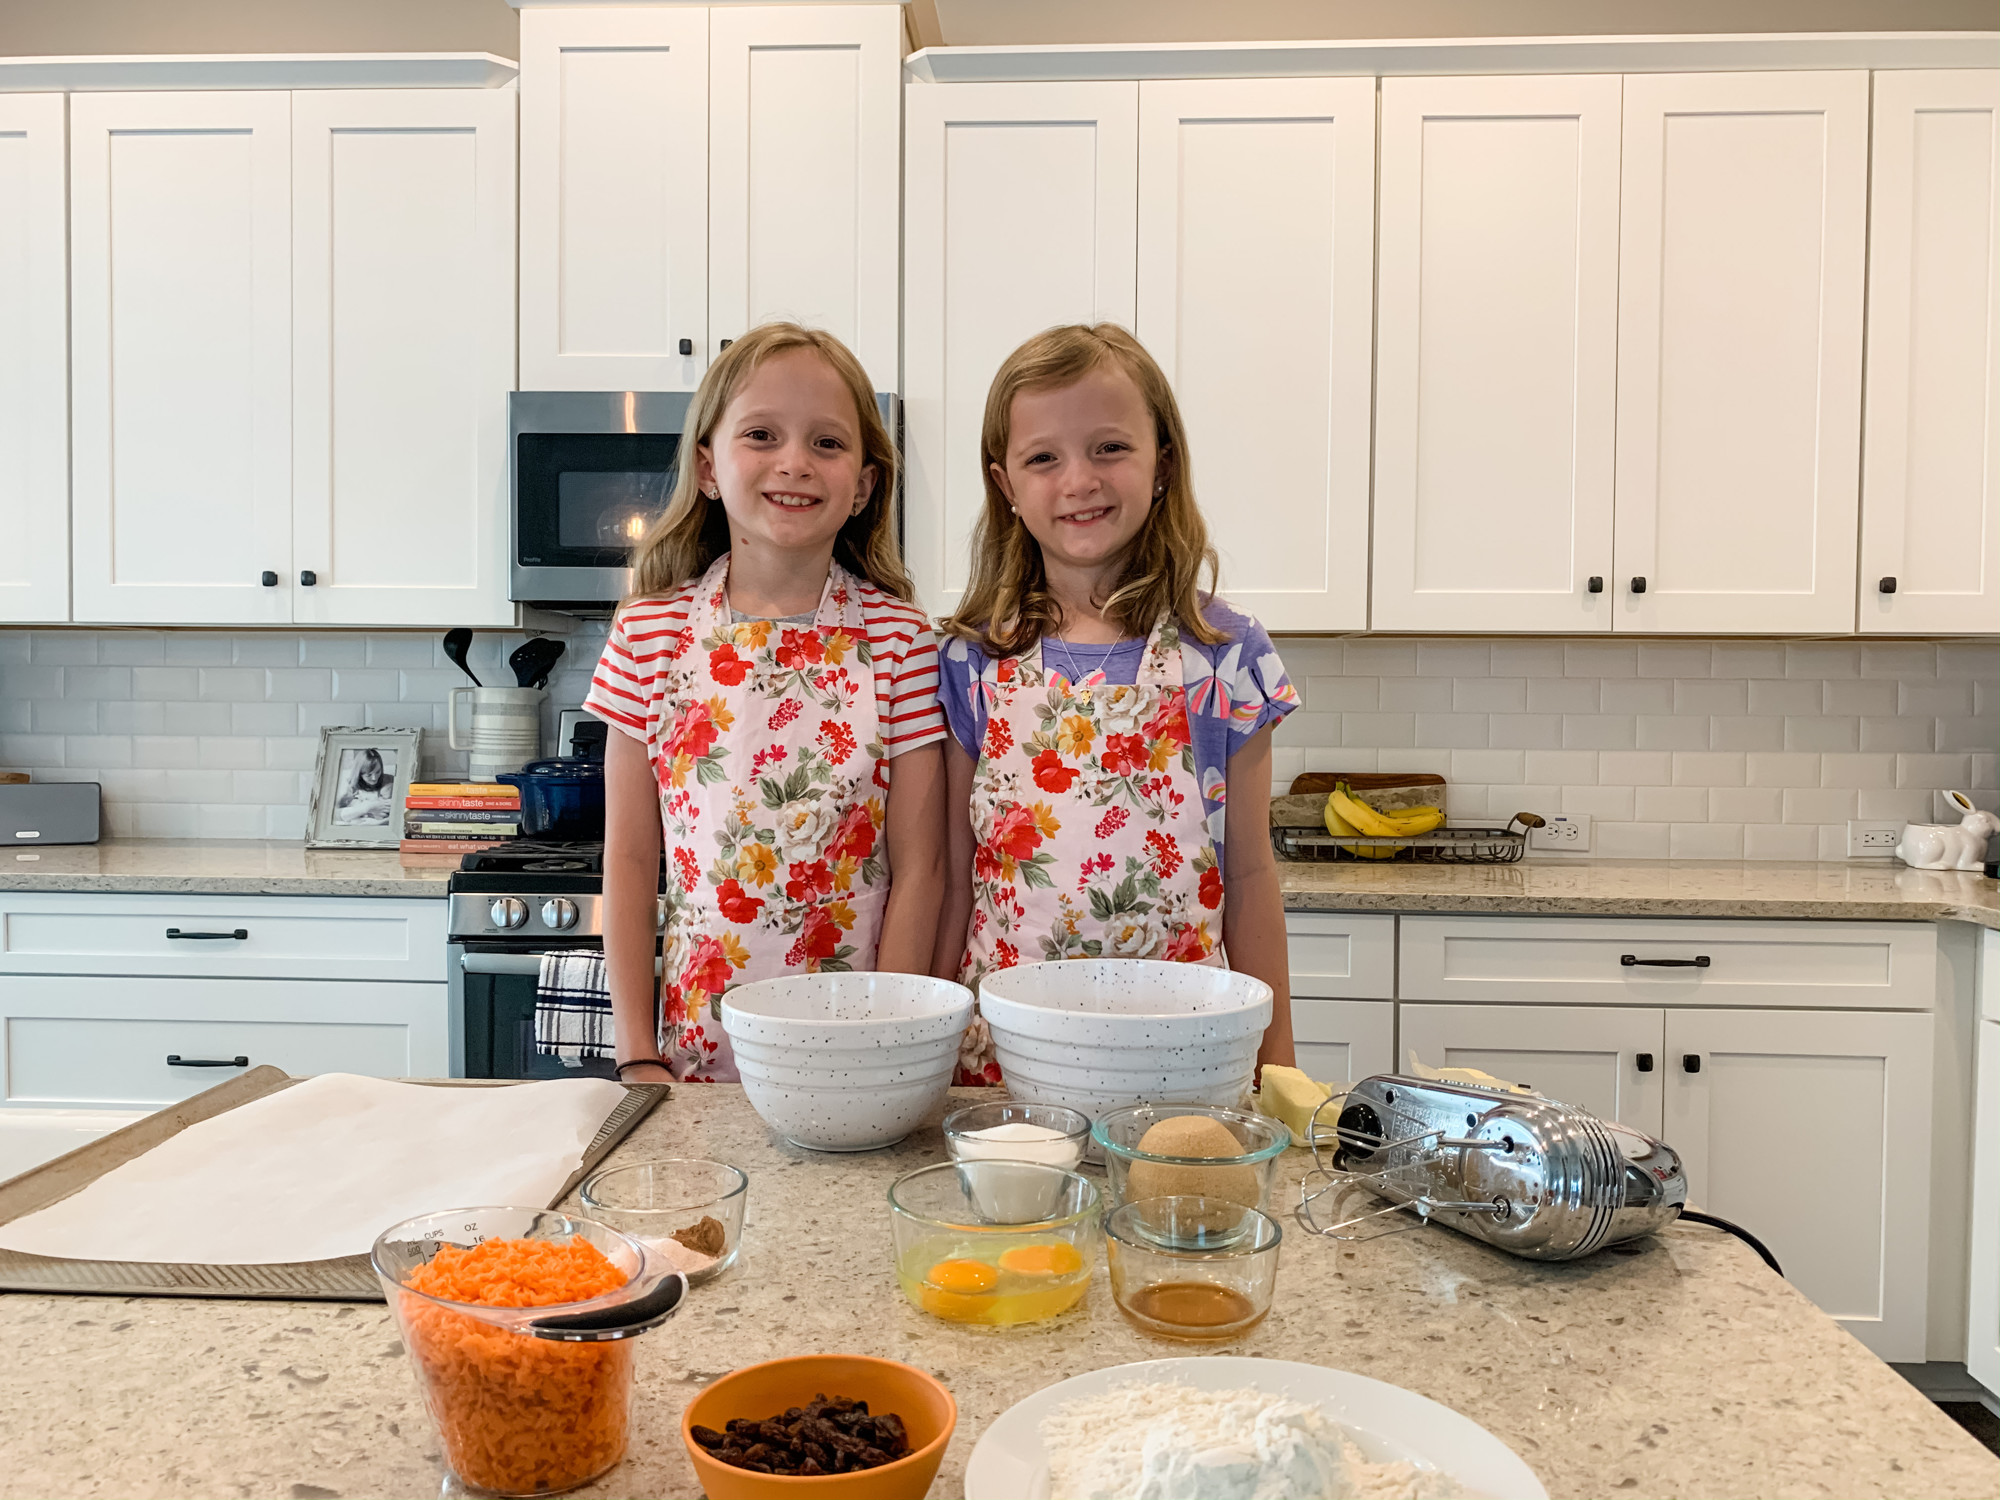 In Episode No. 4 of “Twin Treats,” Molly and Ava Stephens baked Carrot Cake Cookies.